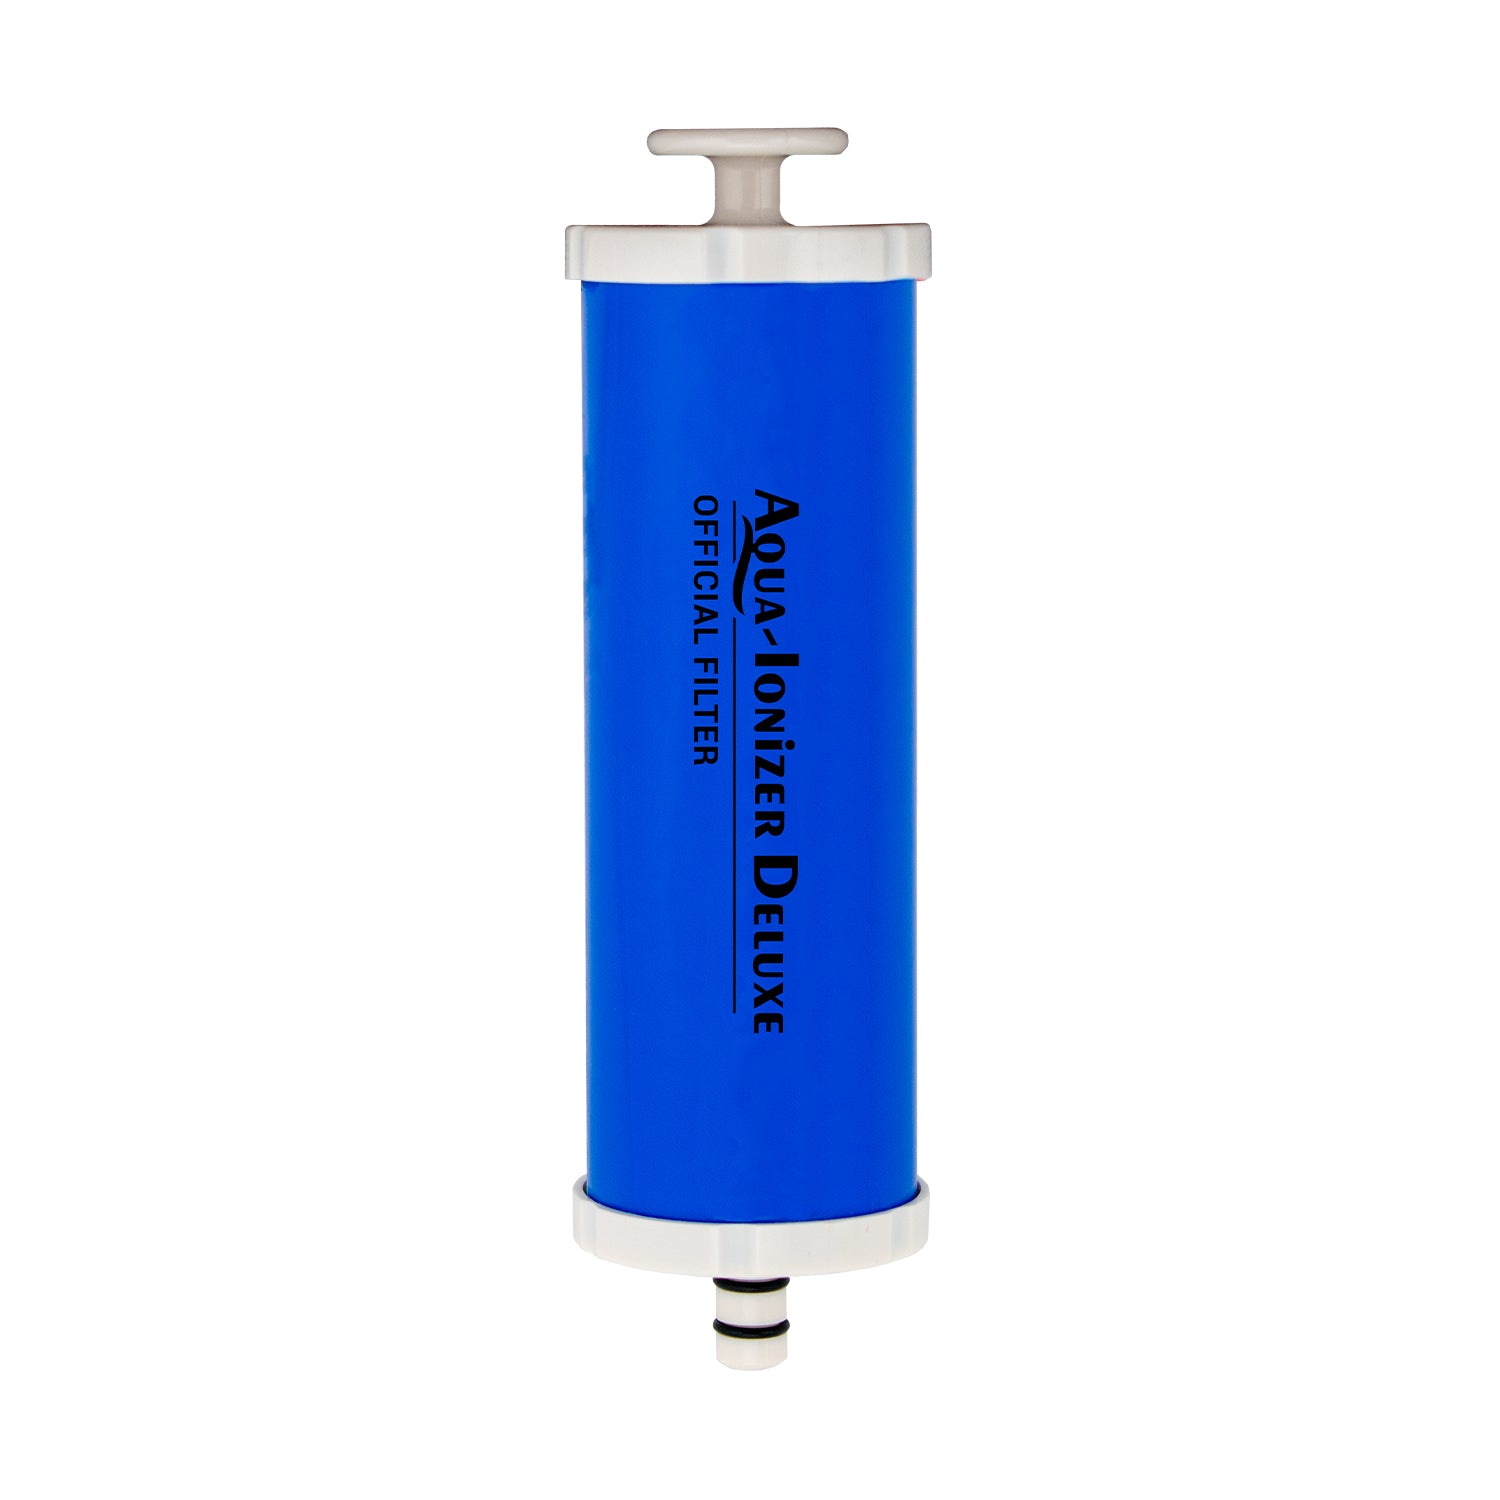 Activated Carbon Replacement Filter